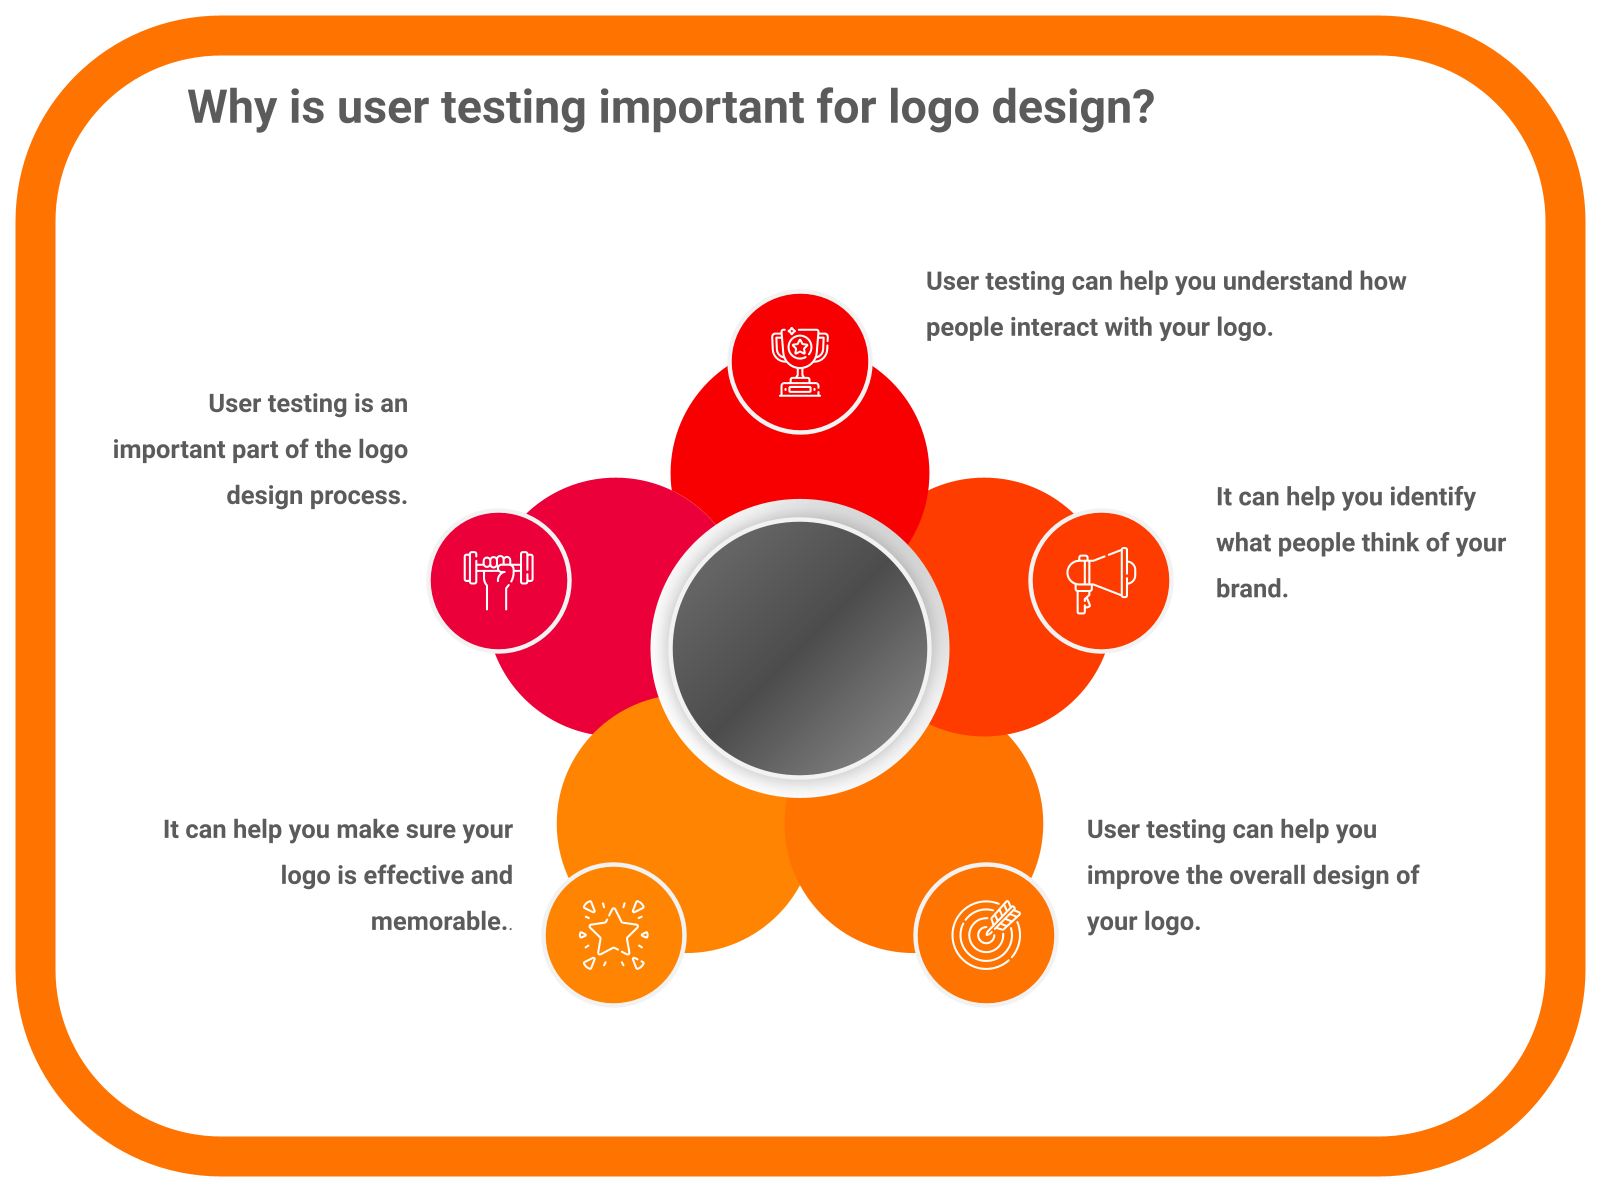 Why is user testing important for logo design?